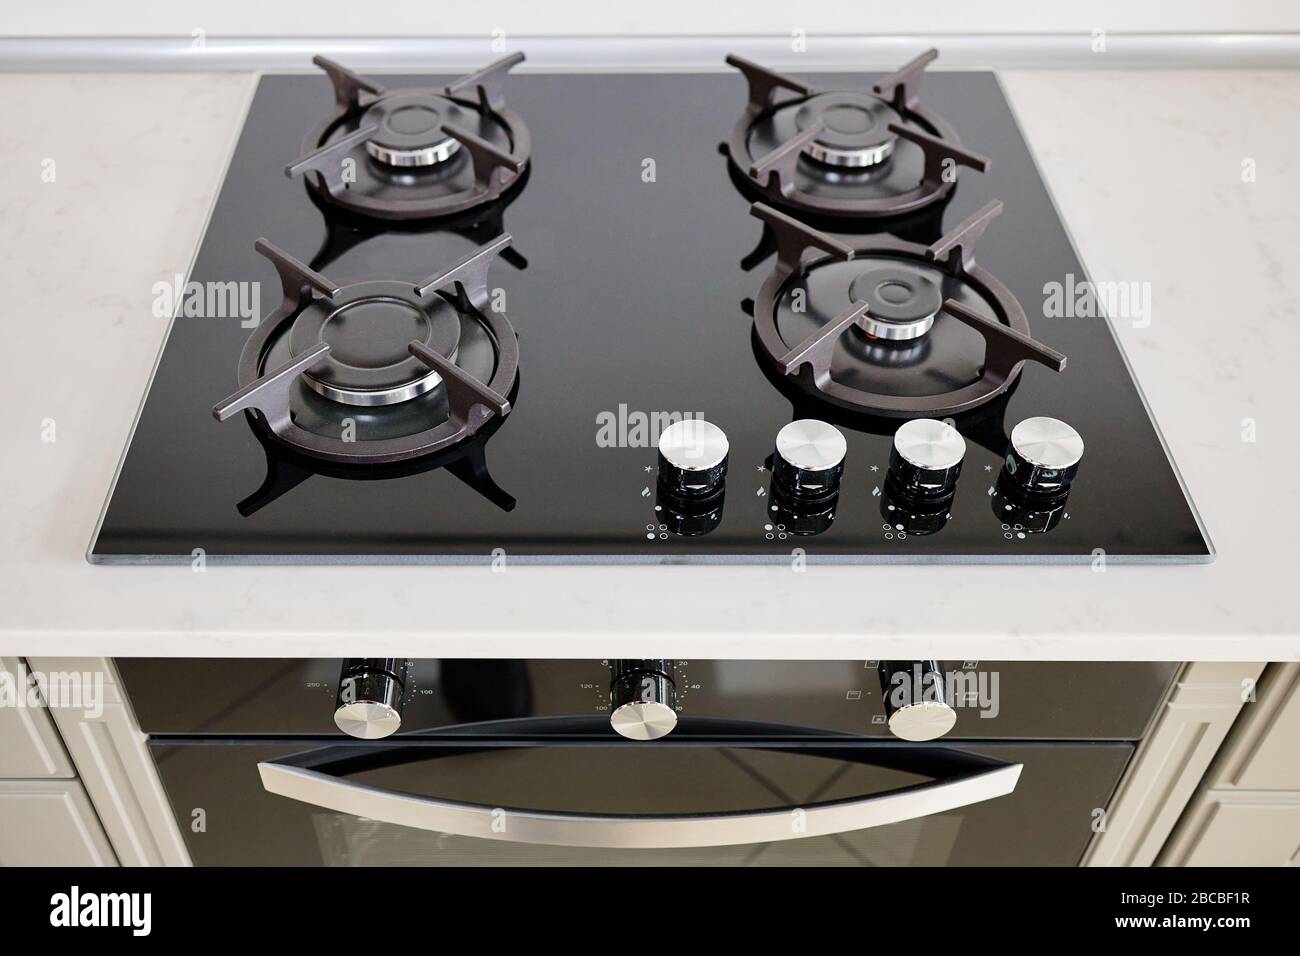 TFCFL 23 Gas Hob Cookstop with 4 Burners Built-In Stove Top Tempered Glass  LPG/NG